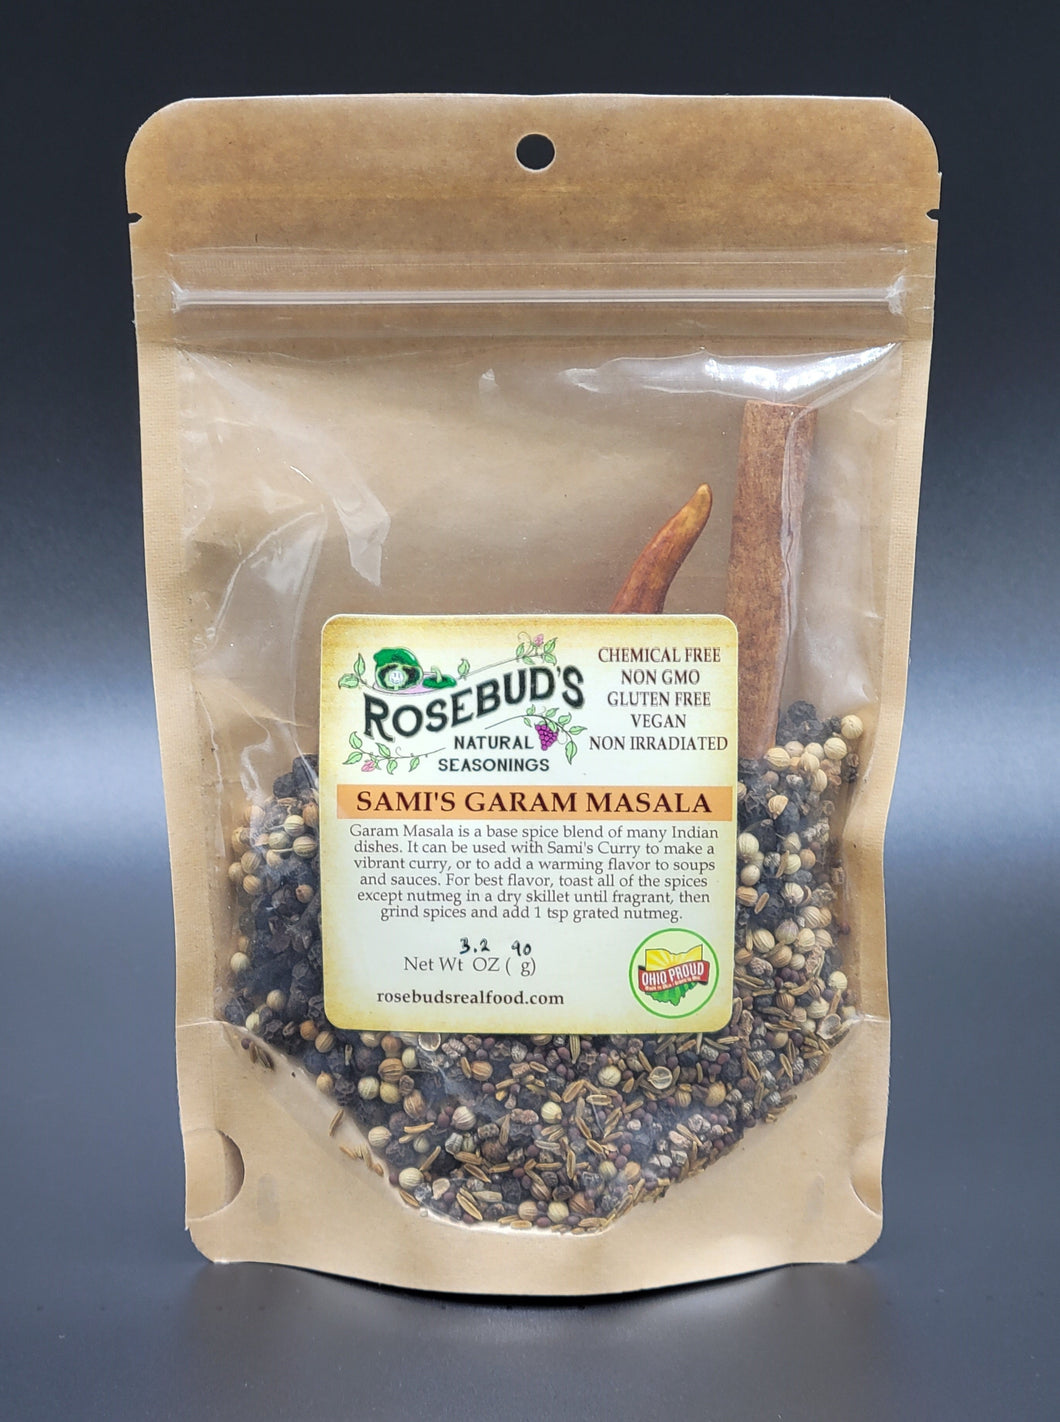 Sami’s Garam Masala - This spice blend is the base of many Indian dishes.